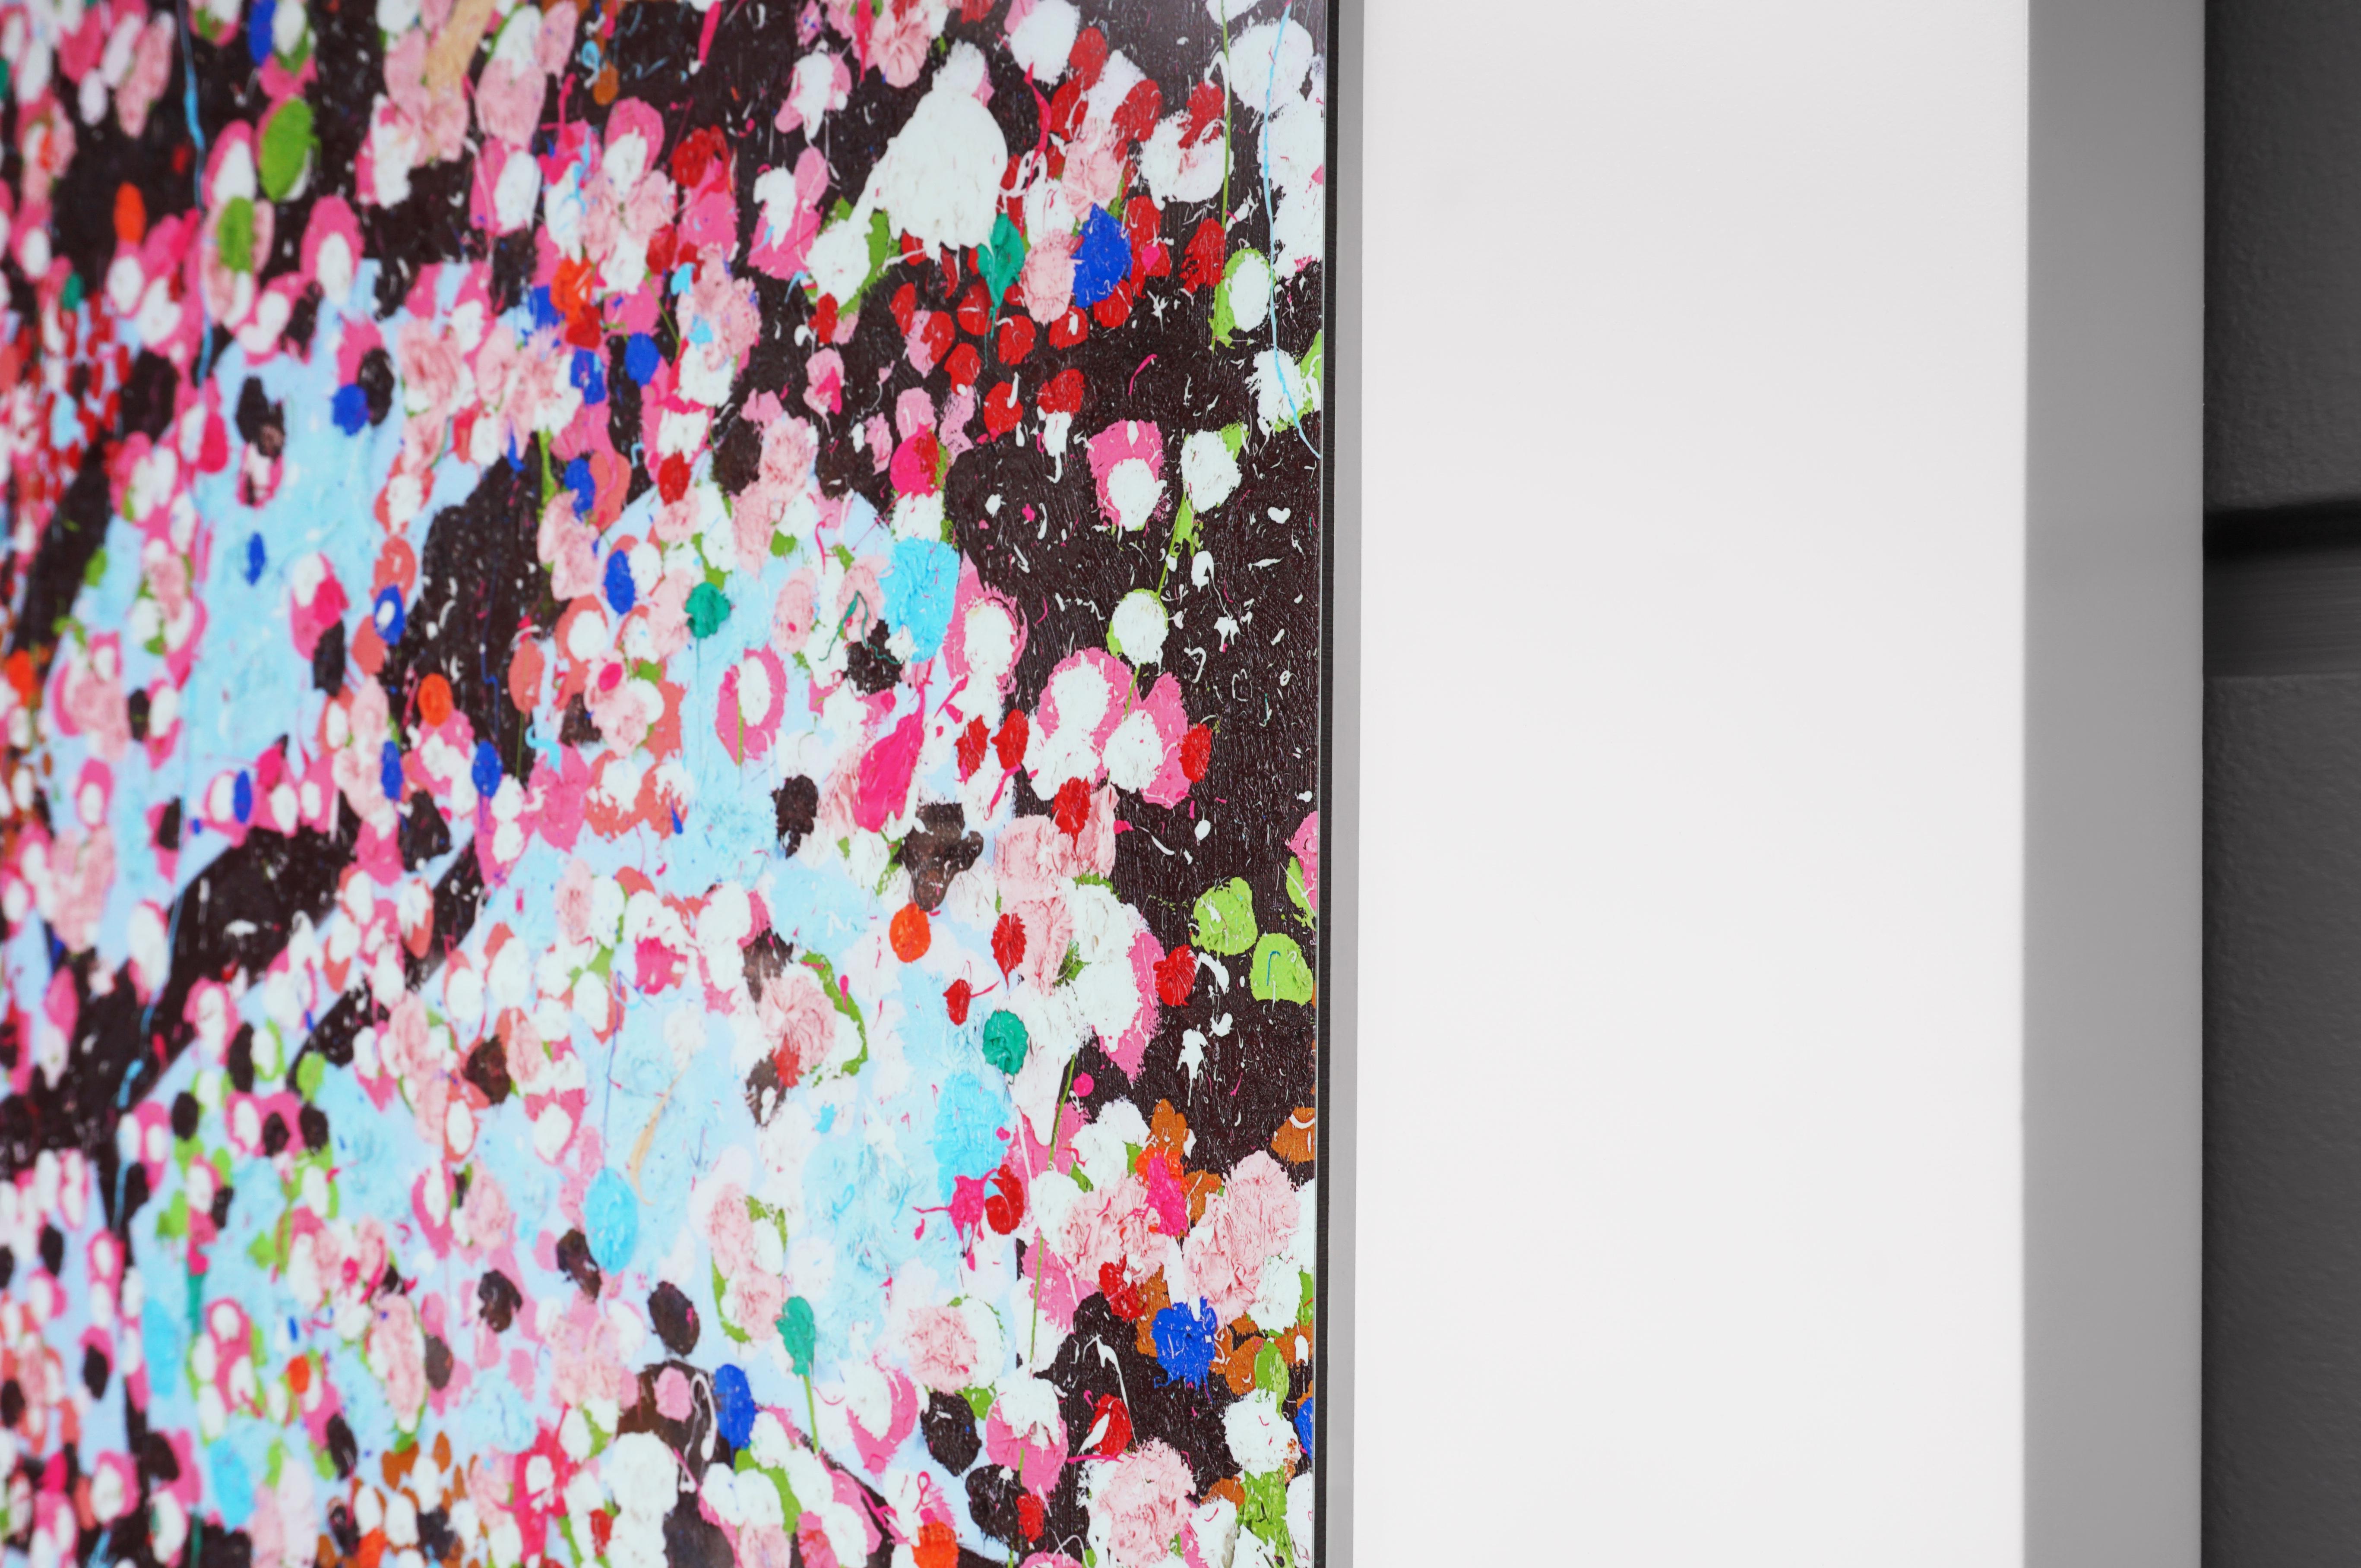 The contemporary pop art cherry blossom landscape ‘Loyalty' is one of the eight from the iconic ‘Virtues’ series by Damien Hirst, the laminated giclée print on aluminum panel was created in 2021 as a reflection of his latest exploration as a master